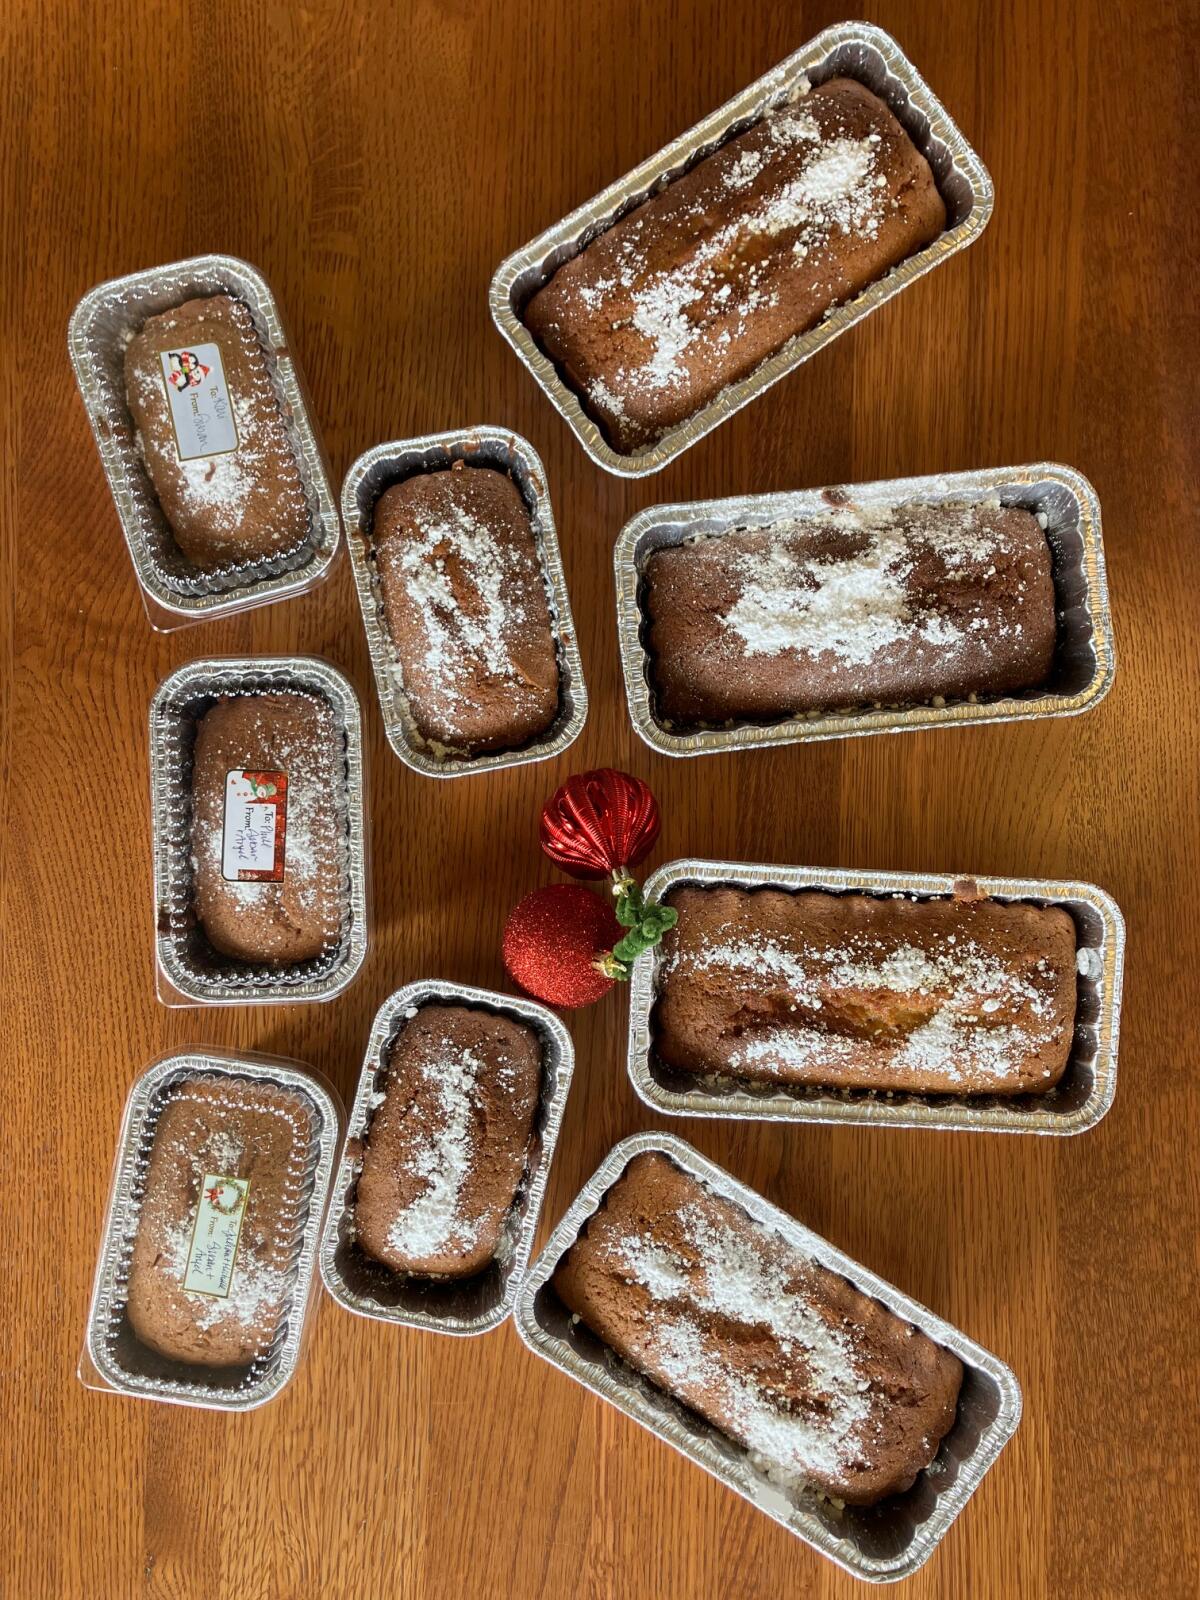 Loaves of cake sit in tins on a table, with a Christmas ornament among them.